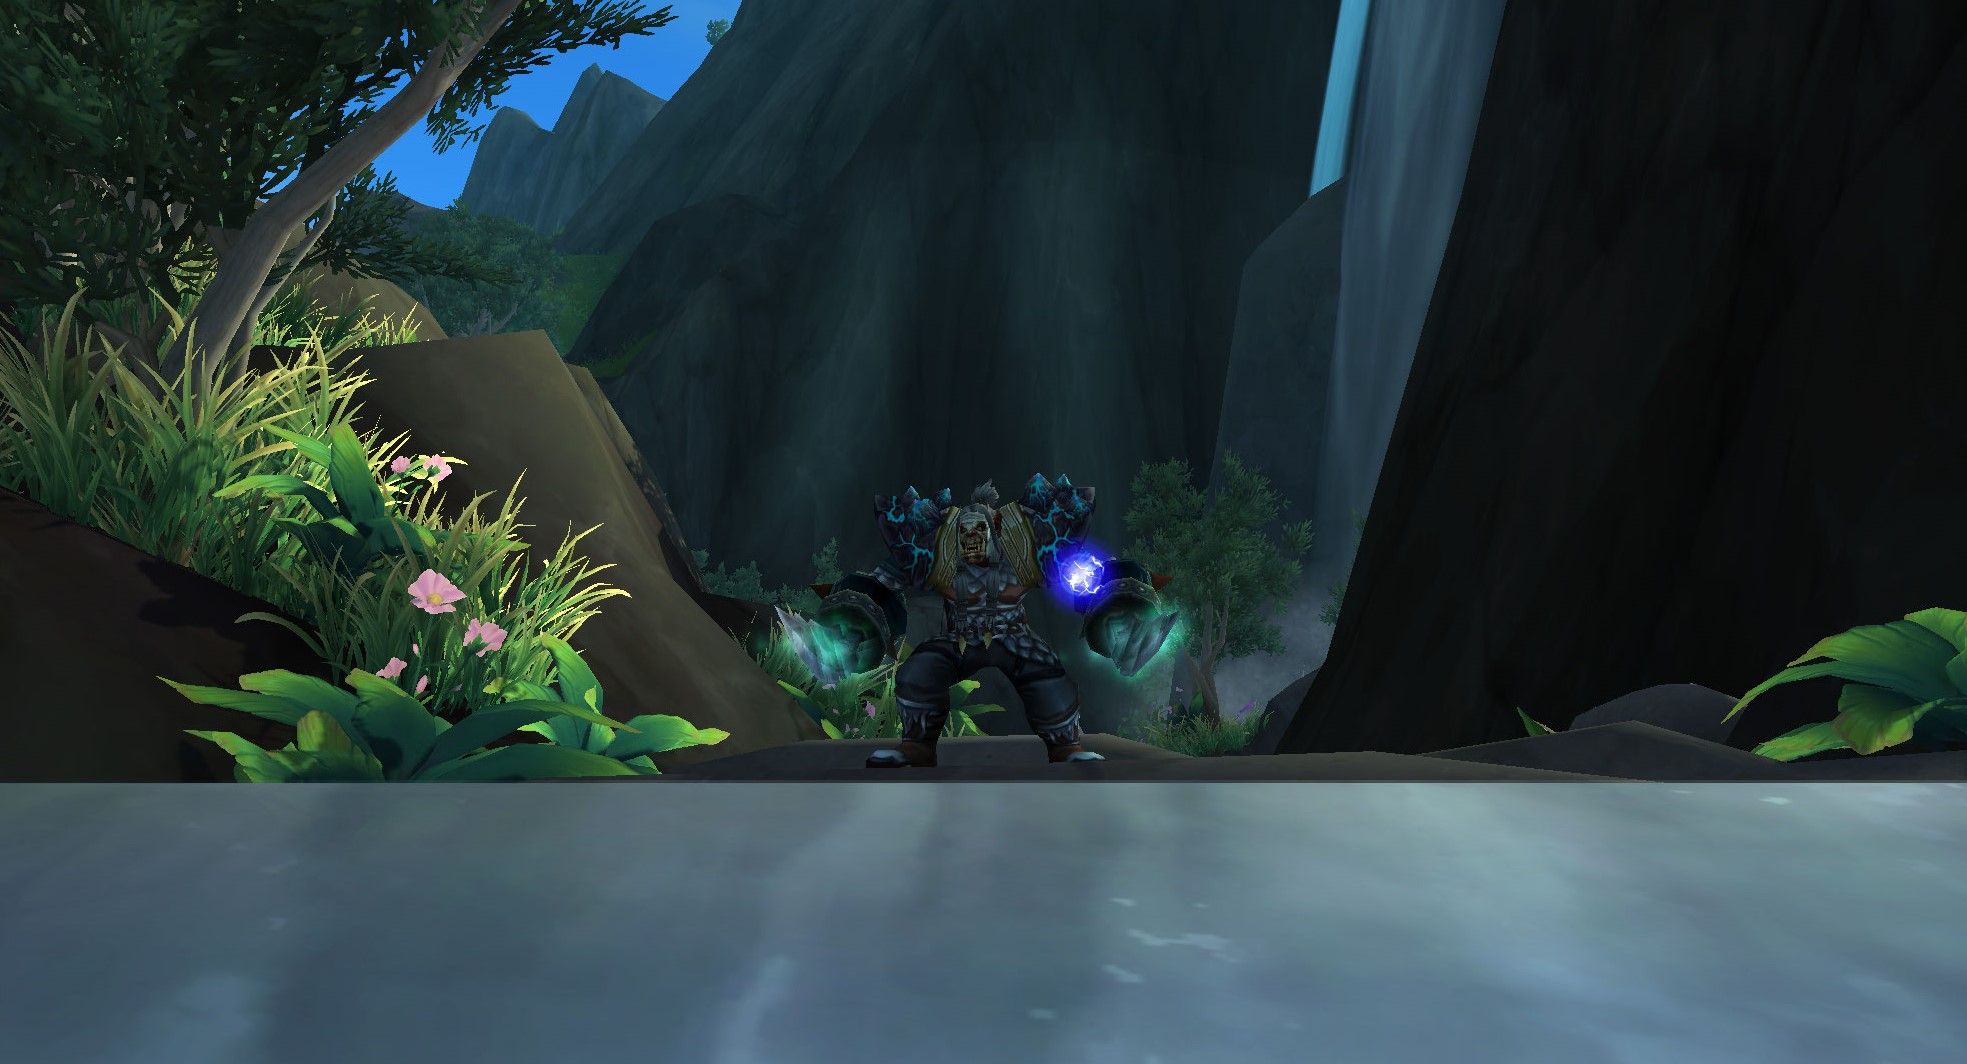 Enhancement Shaman with waterfall in background